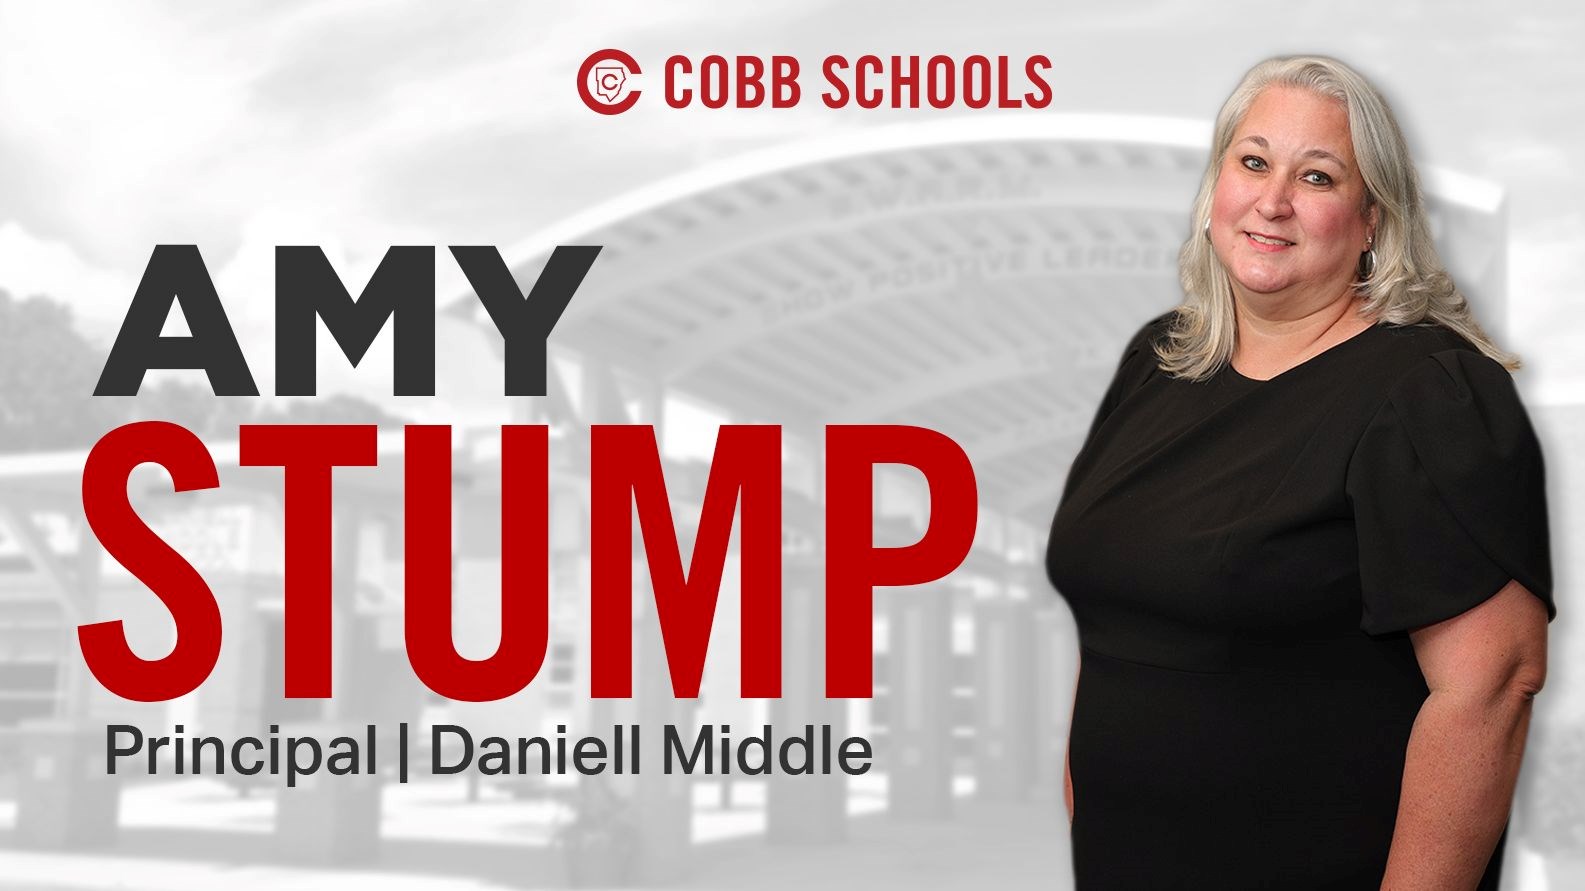 Amy Stump will serve as principal of Daniell Middle School